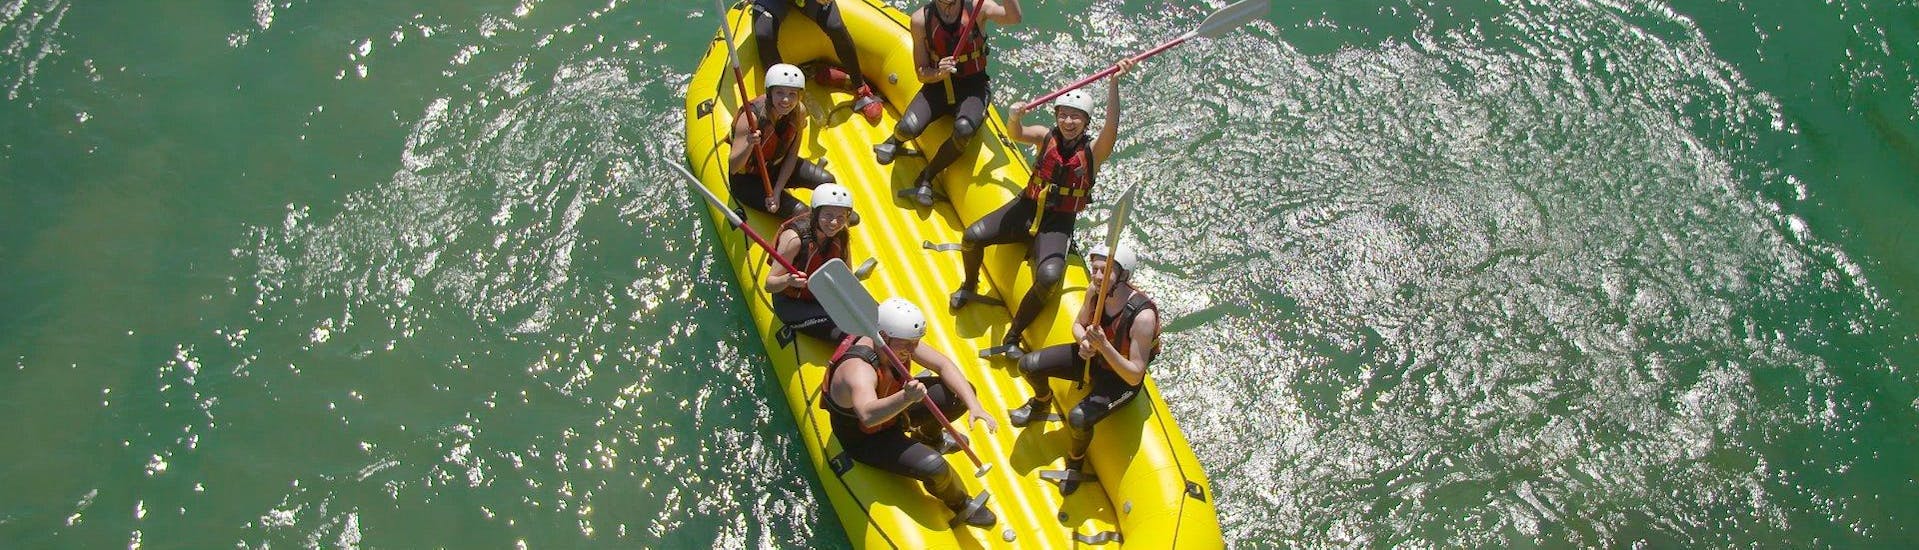 Adventure Day mit Rafting & Canyoning in Bled.